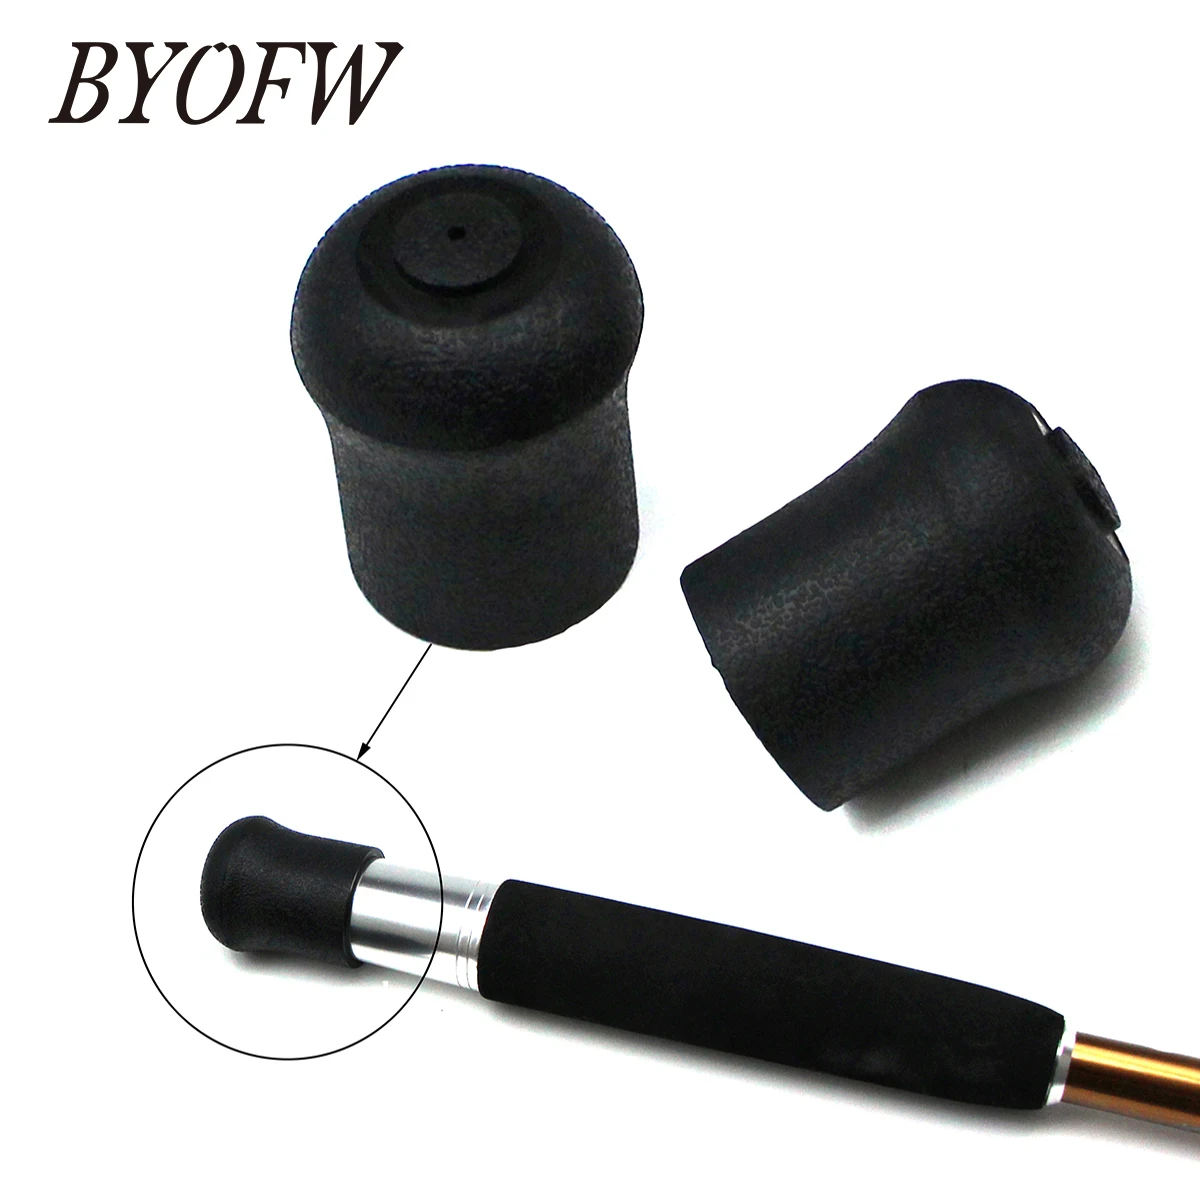 BYOFW 1 Piece Fishing Rod Handle Butt End Cap Black Durable Pole